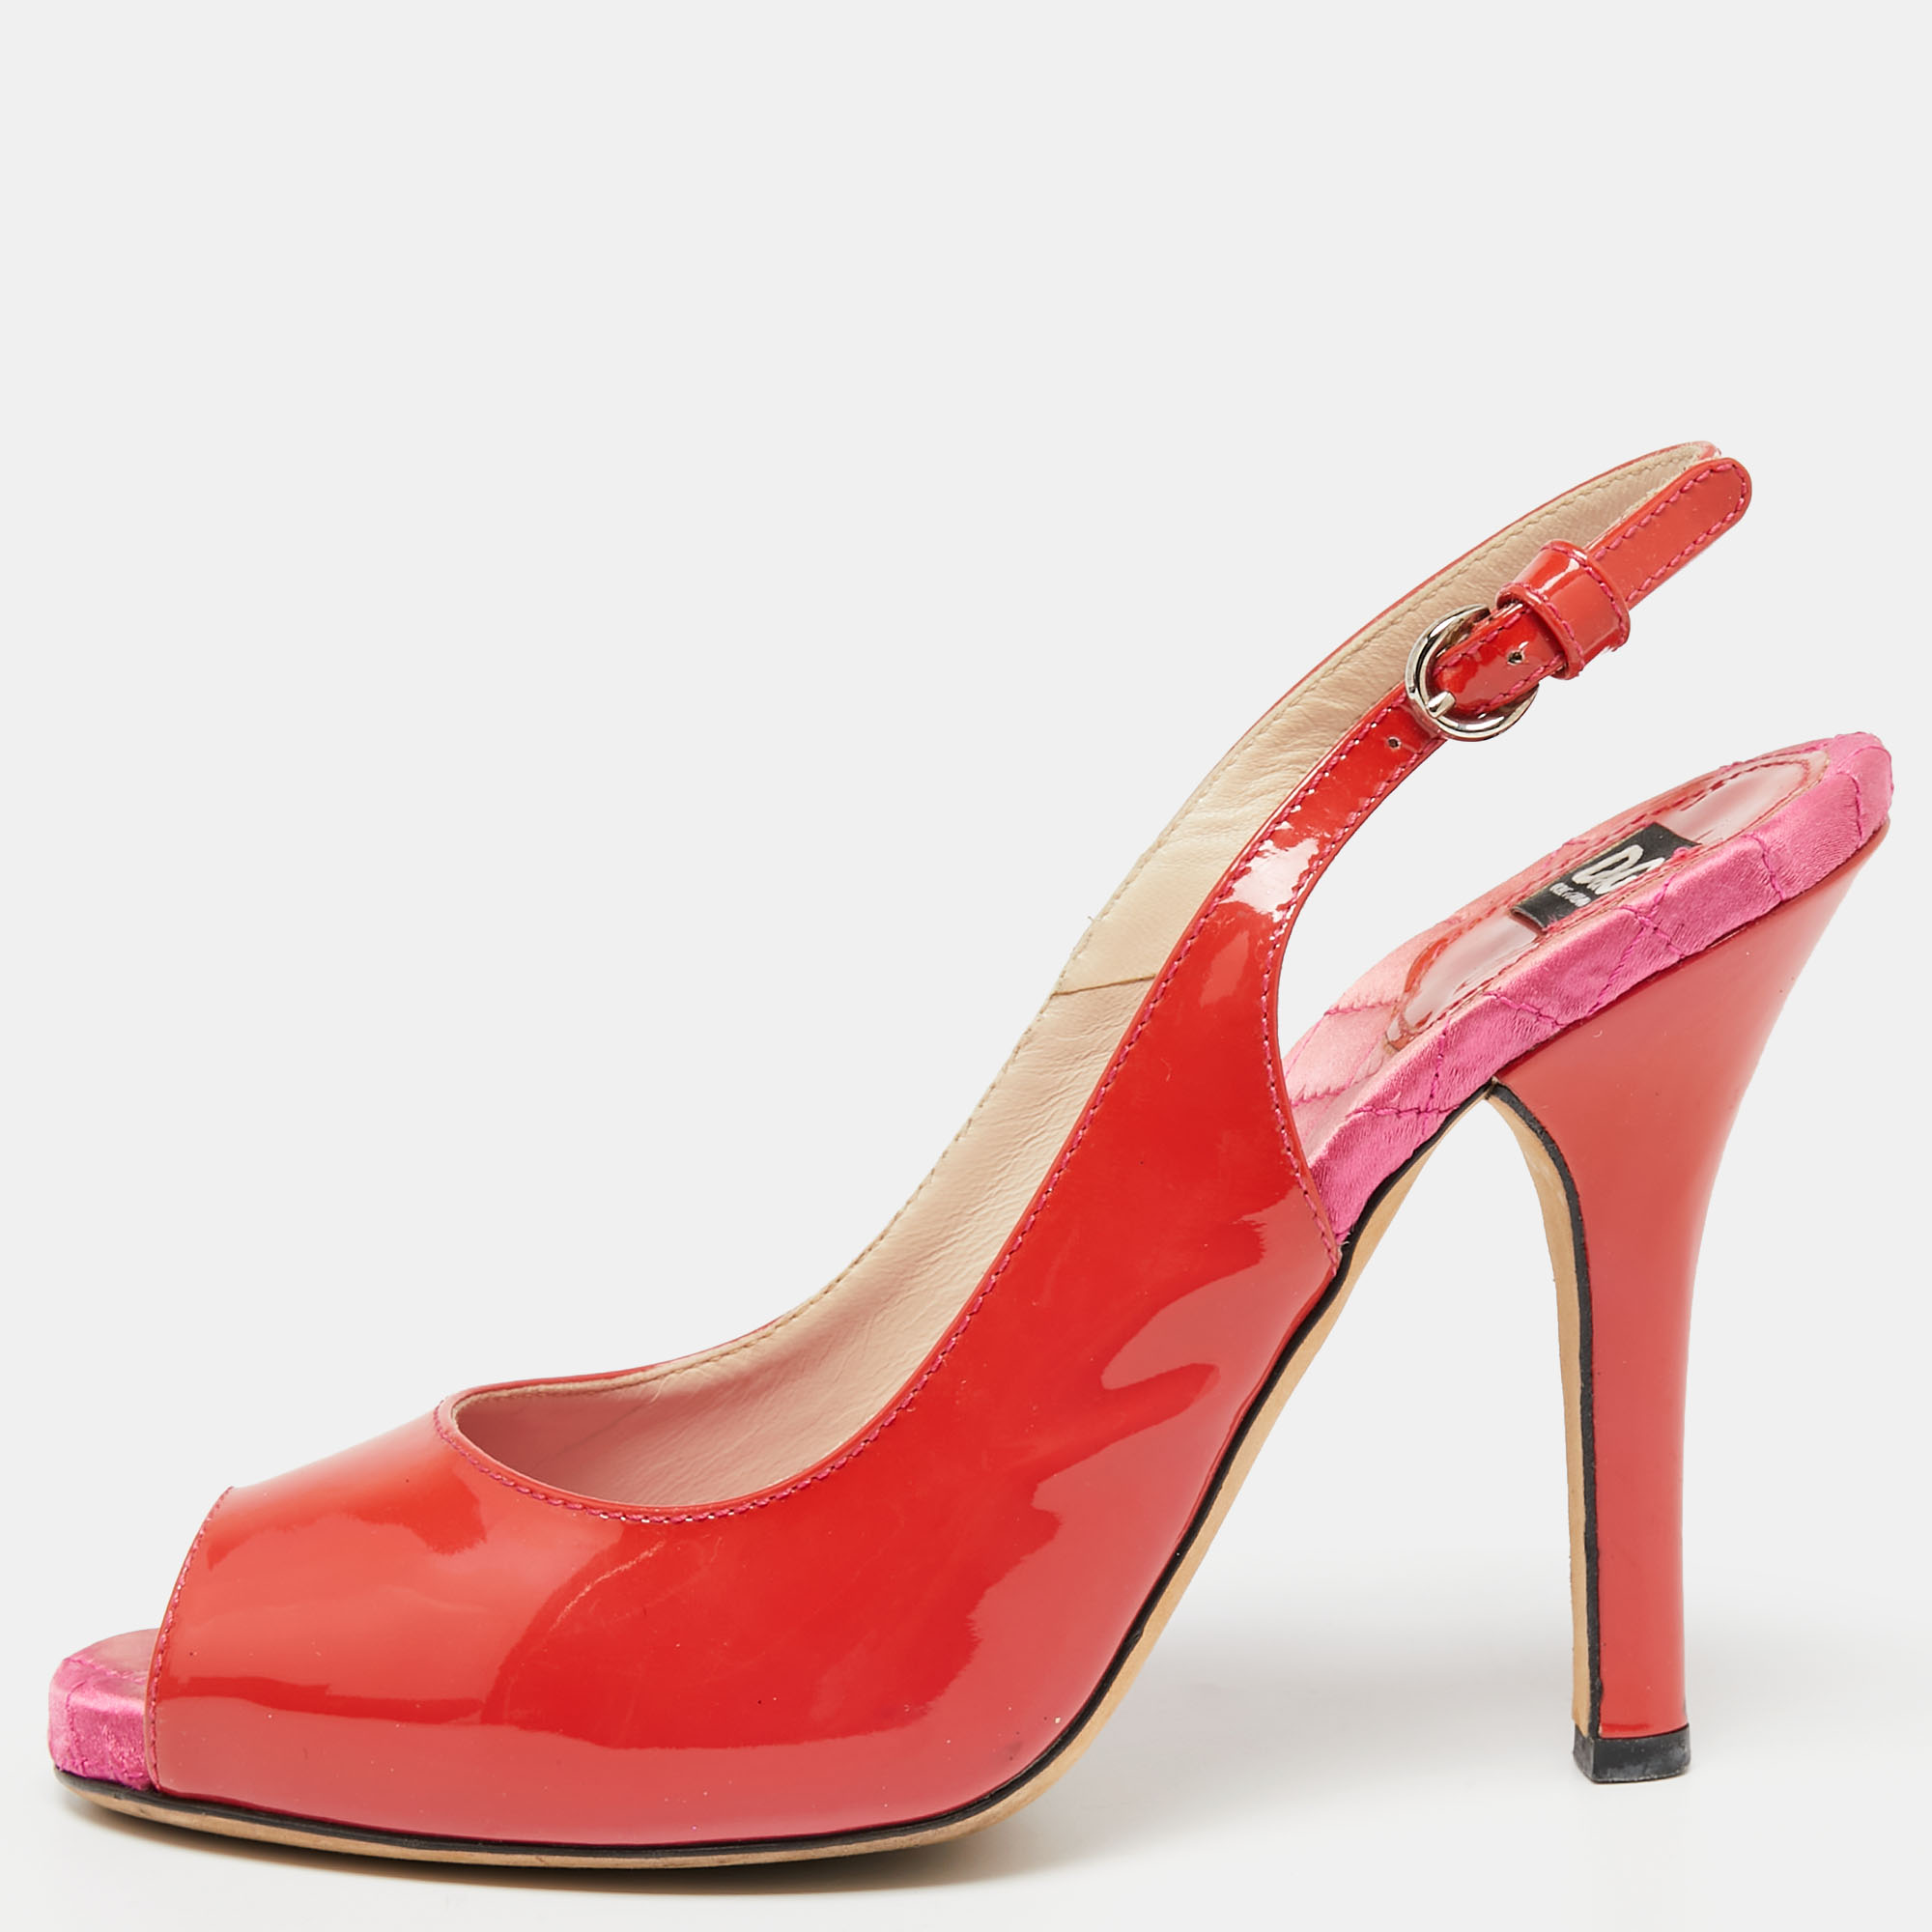 D&G  Red Patent Leather Peep Toe Slingback Pumps Size 37.5